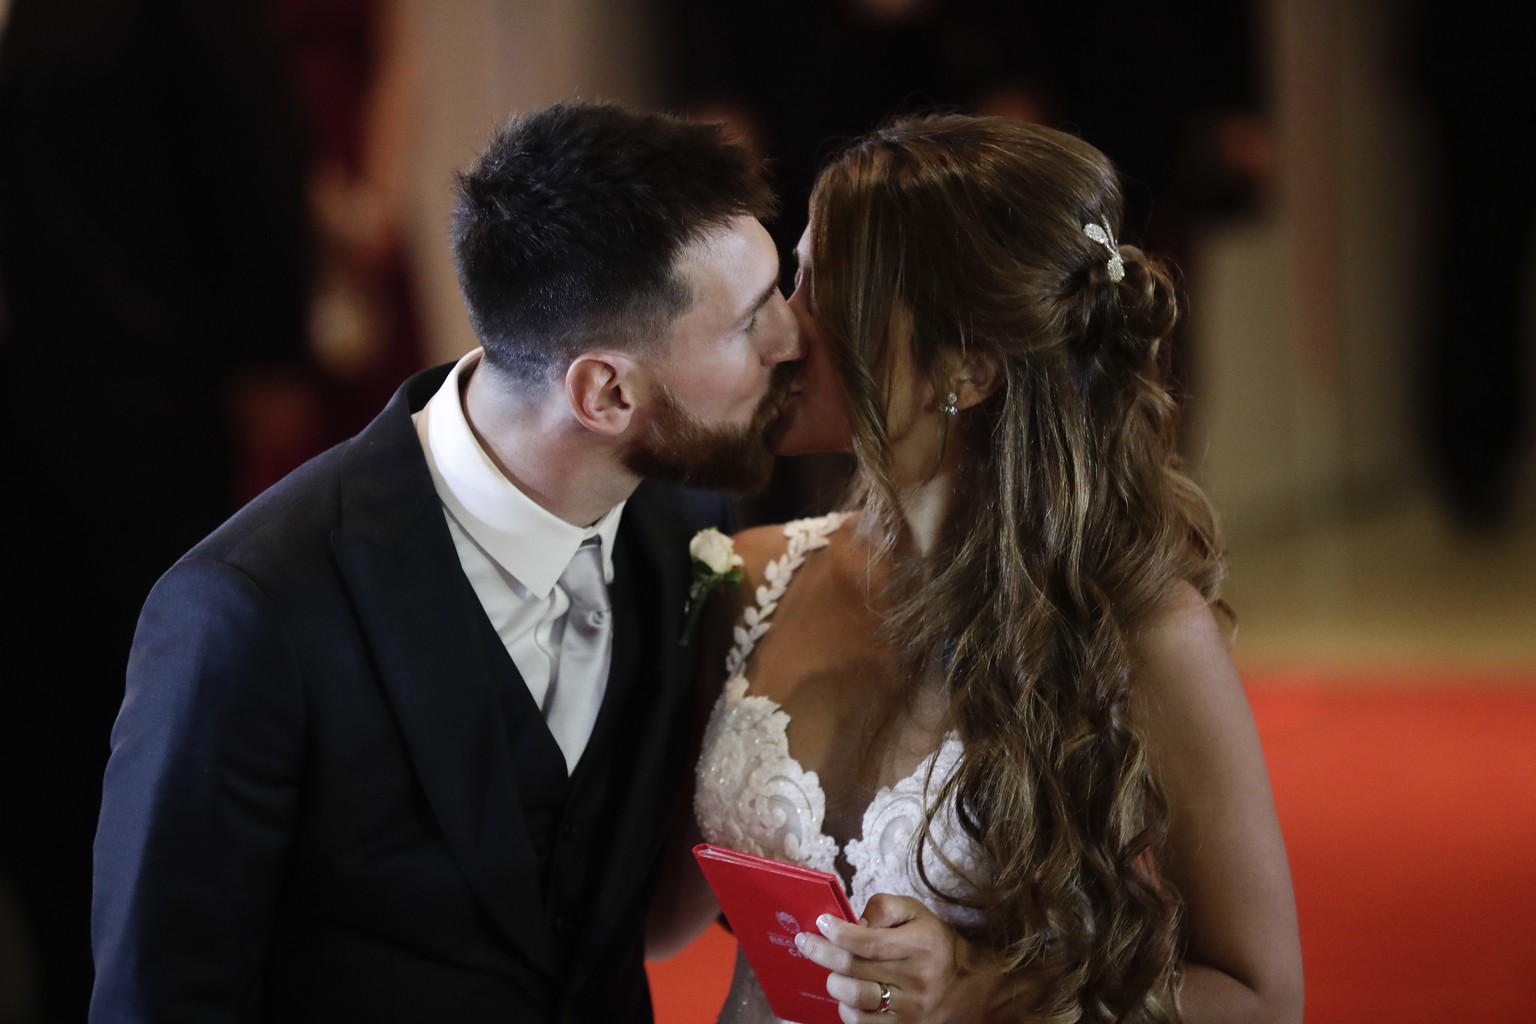 Newlyweds Lionel Messi and Antonella Roccuzzo kiss while posing for photographers on the red carpet after tying the knot in Rosario, Argentina, Friday, June 30, 2017. About 250 guests, including teamm ...